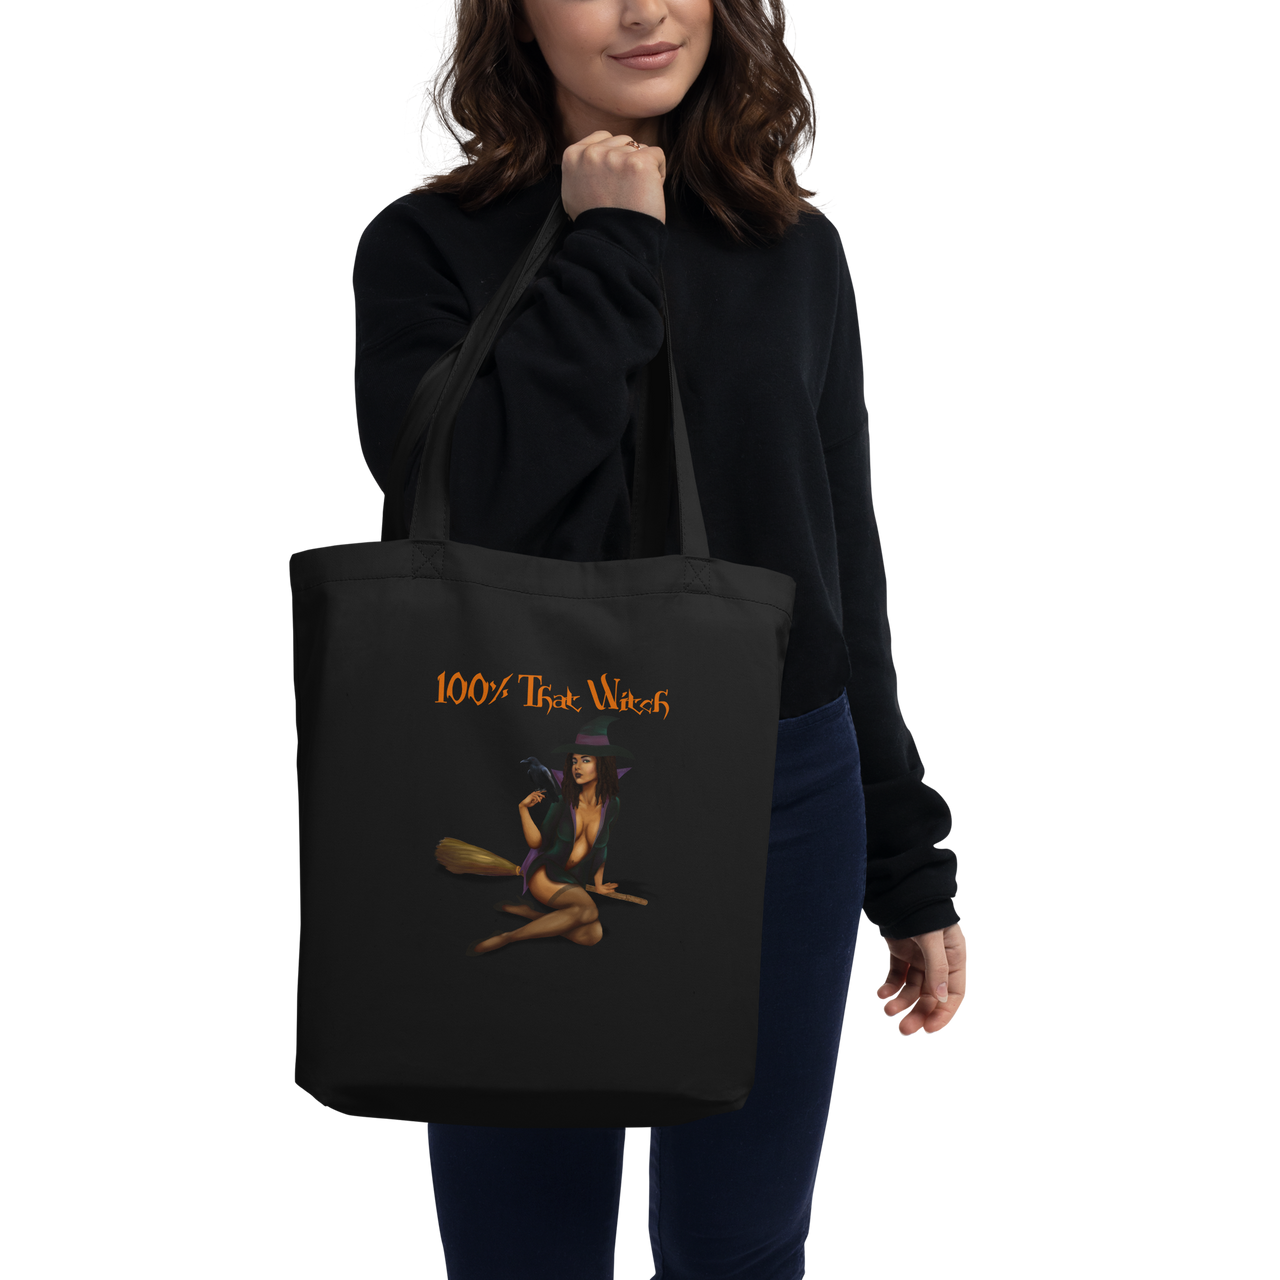 Halloween/Tote Bag/100% That Witch SHAVA